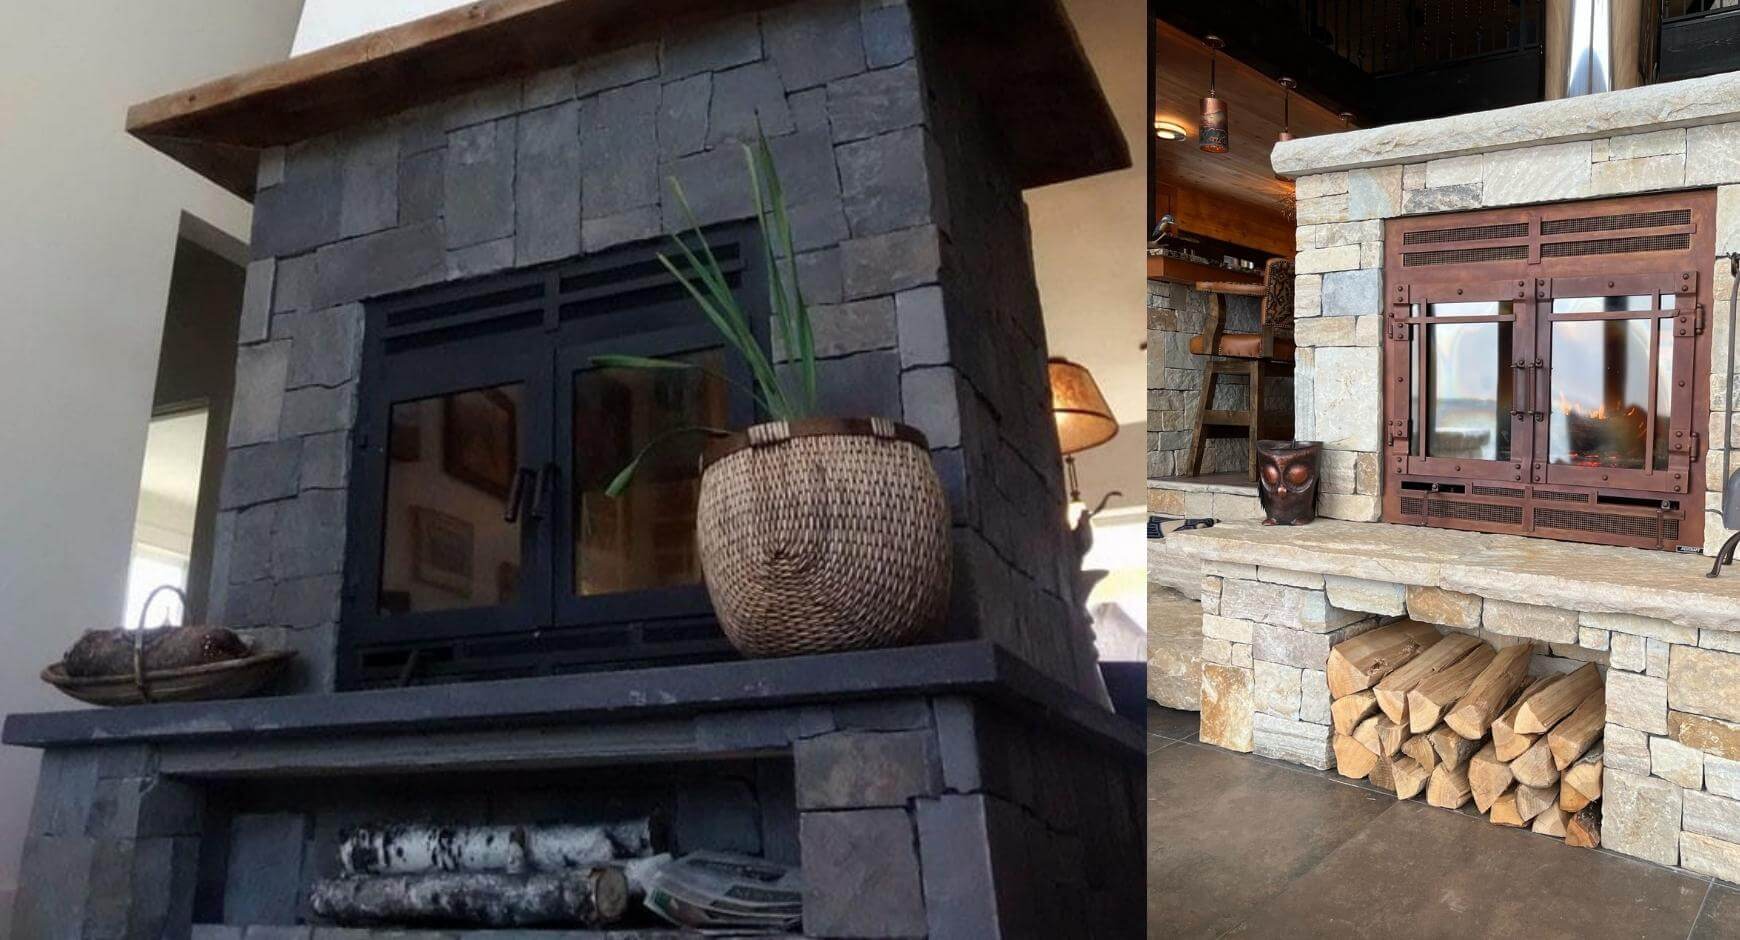 firewood stored under a stone fireplace